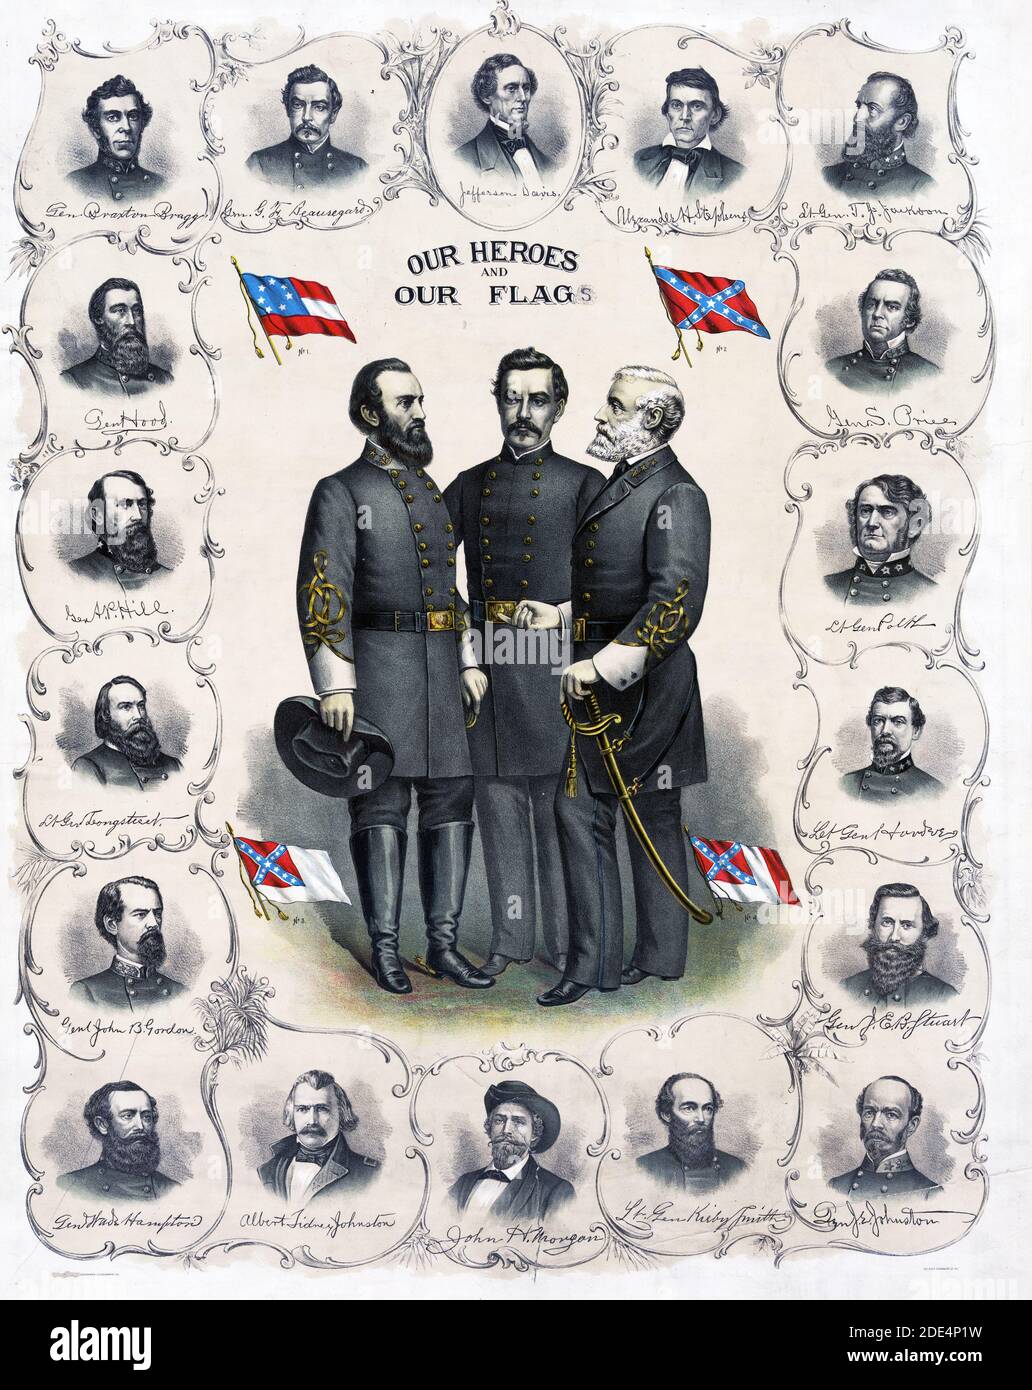 Print showing full-length portraits of Robert E. Lee, Stonewall Jackson, and G.T. Beauregard with four versions of the Confederate flag surrounded by bust portraits of Jefferson Davis and Confederate Army officers. Stock Photo